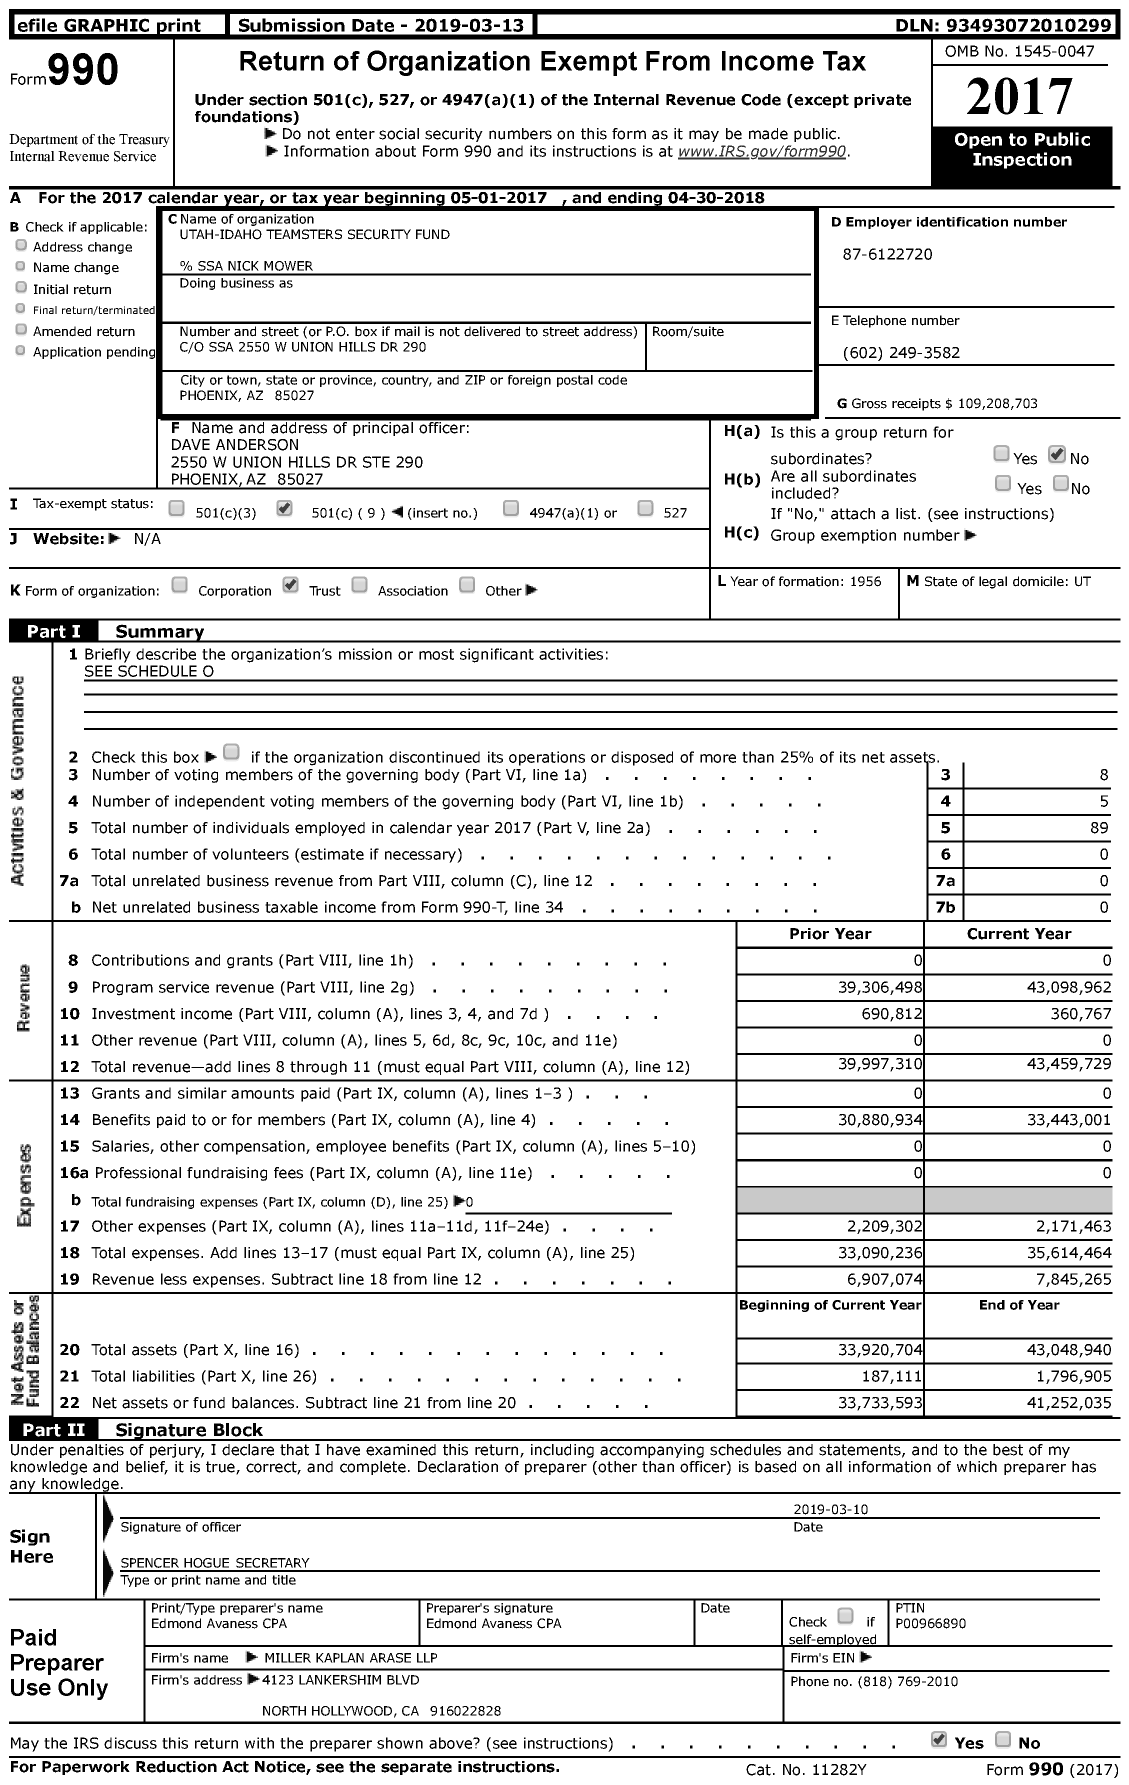 Image of first page of 2017 Form 990 for Utah-Idaho Teamsters Security Fund